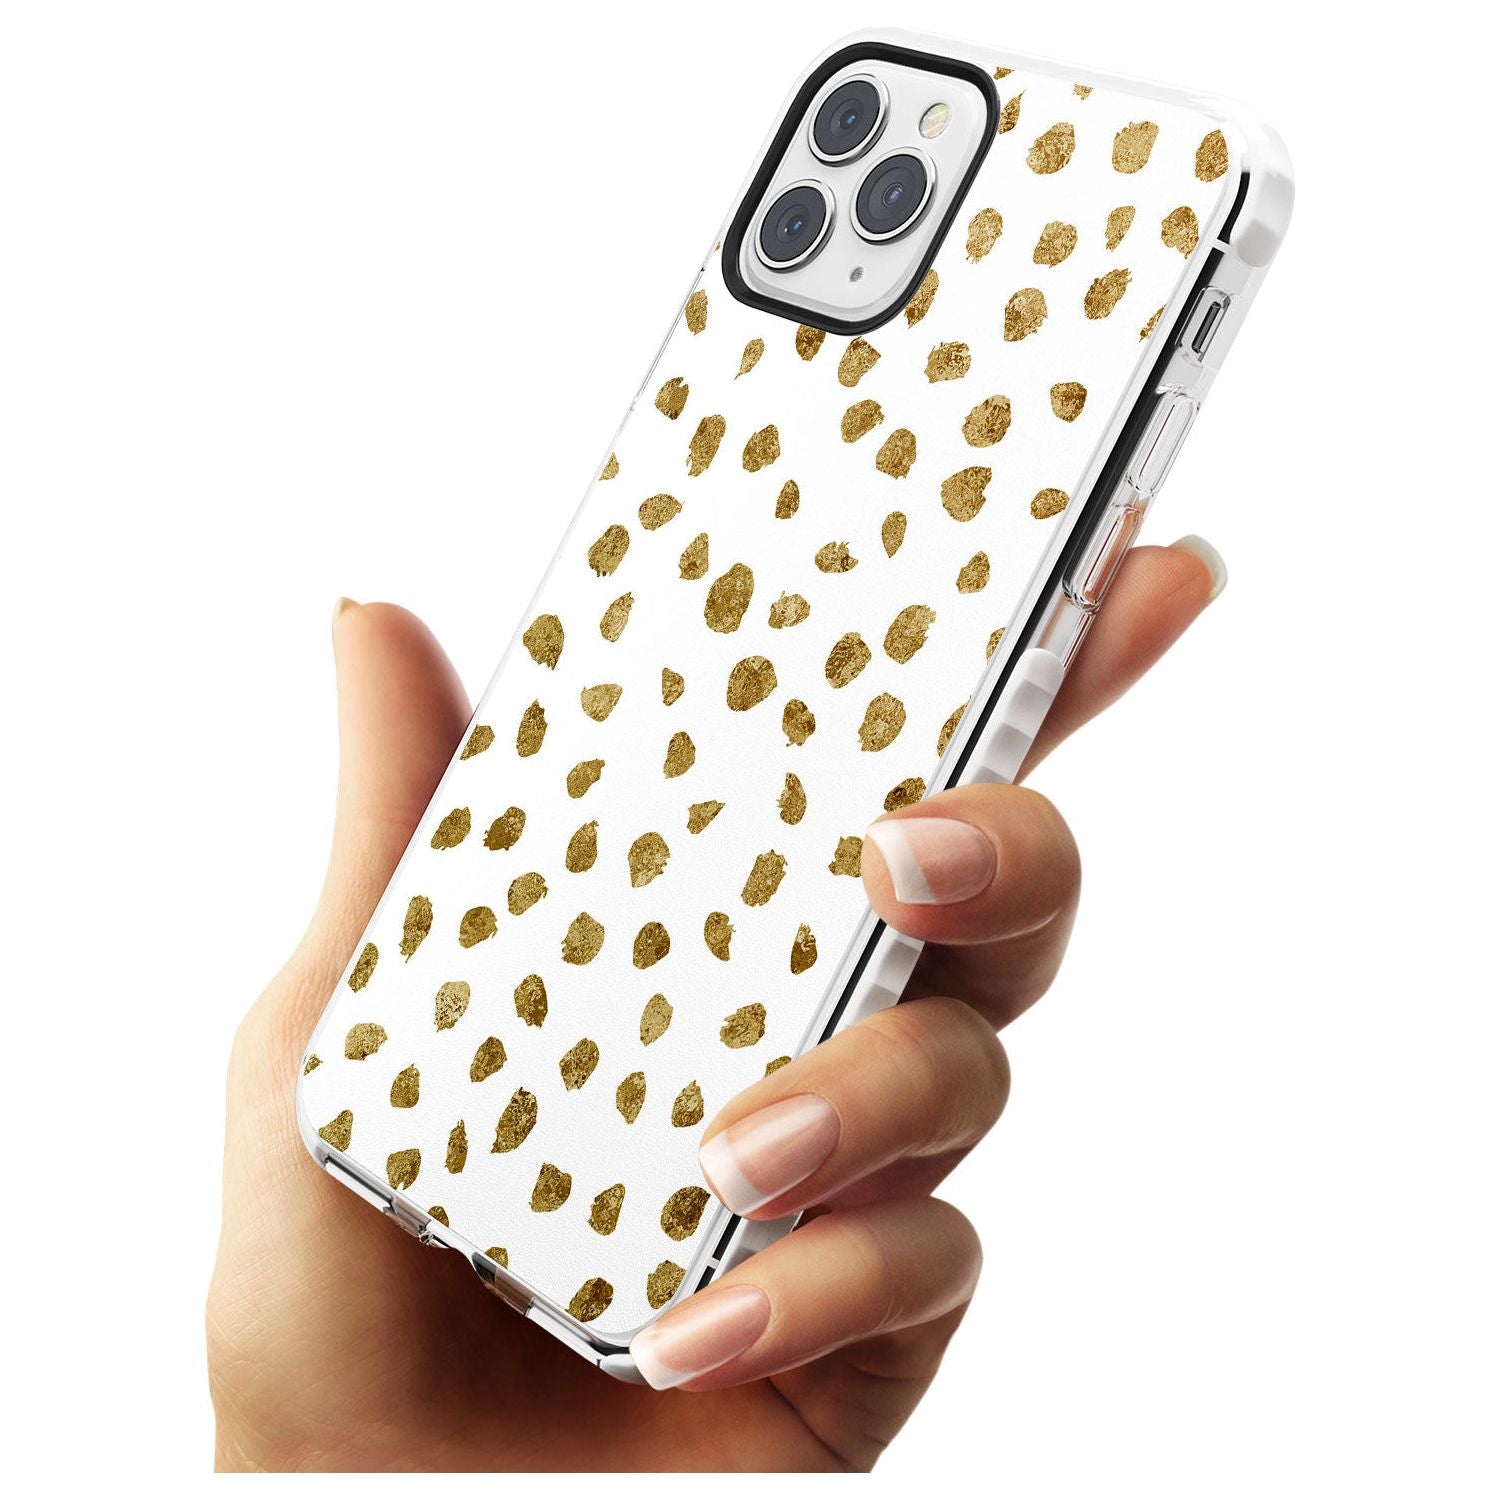 Gold Look on White Dalmatian Polka Dot Spots Impact Phone Case for iPhone 11 Pro Max